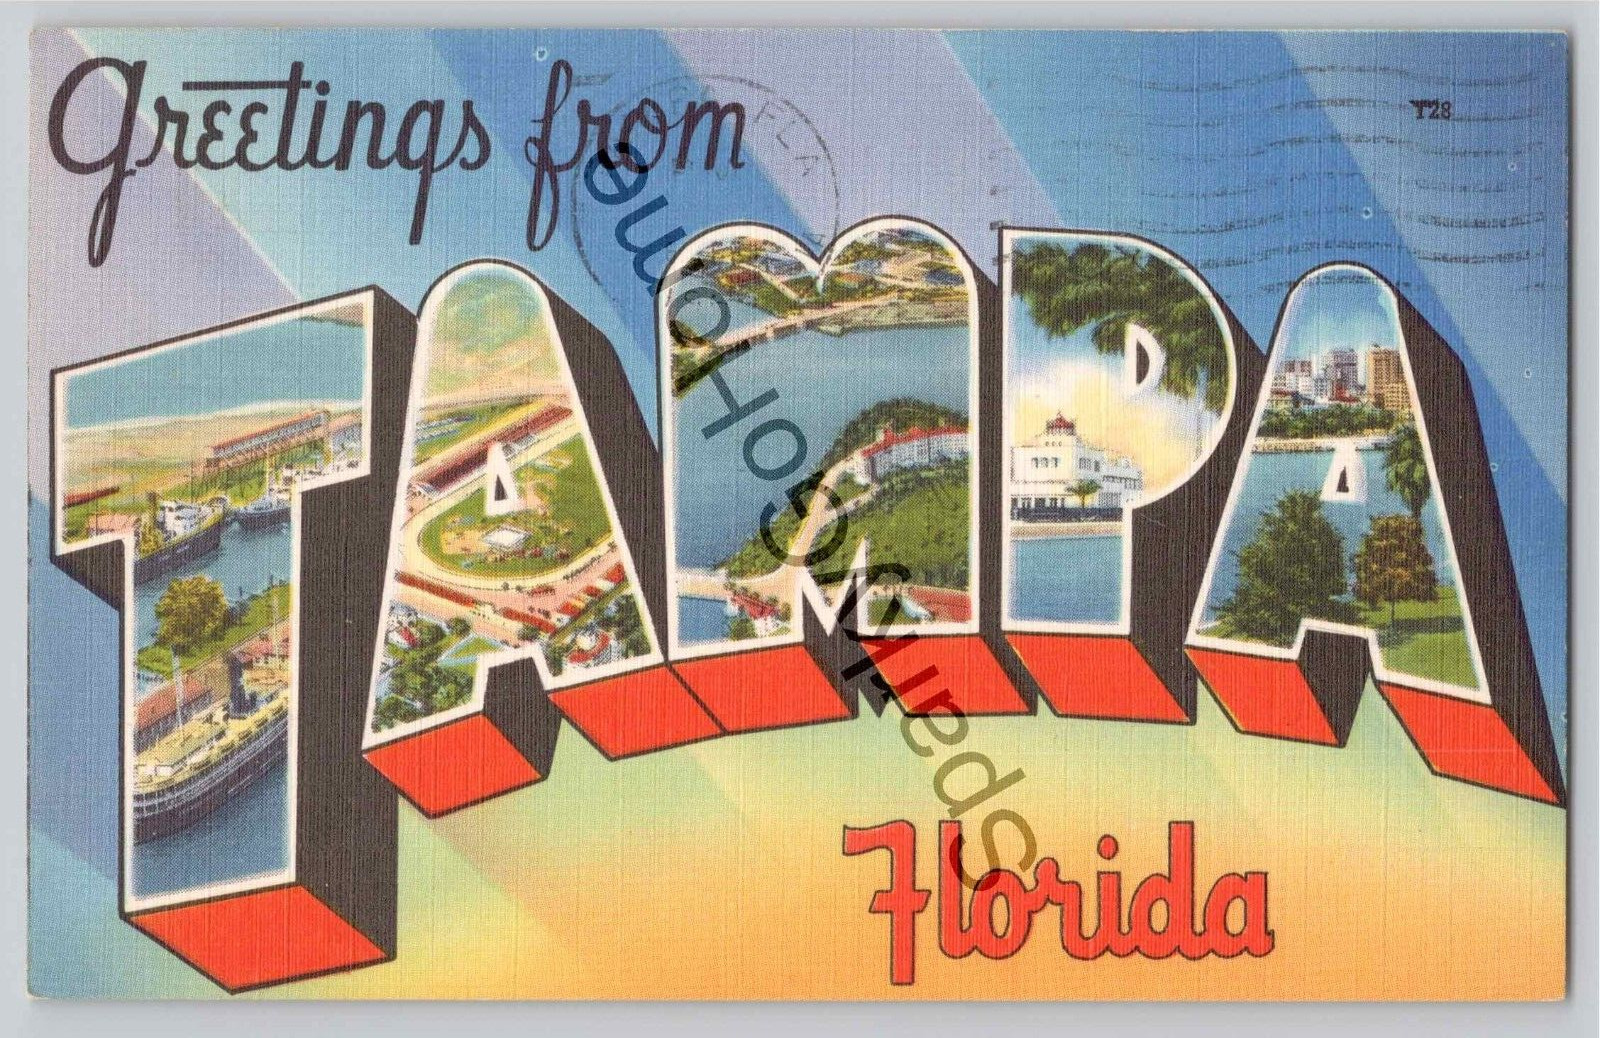 GREETINGS FROM Tampa Florida Posted 1952